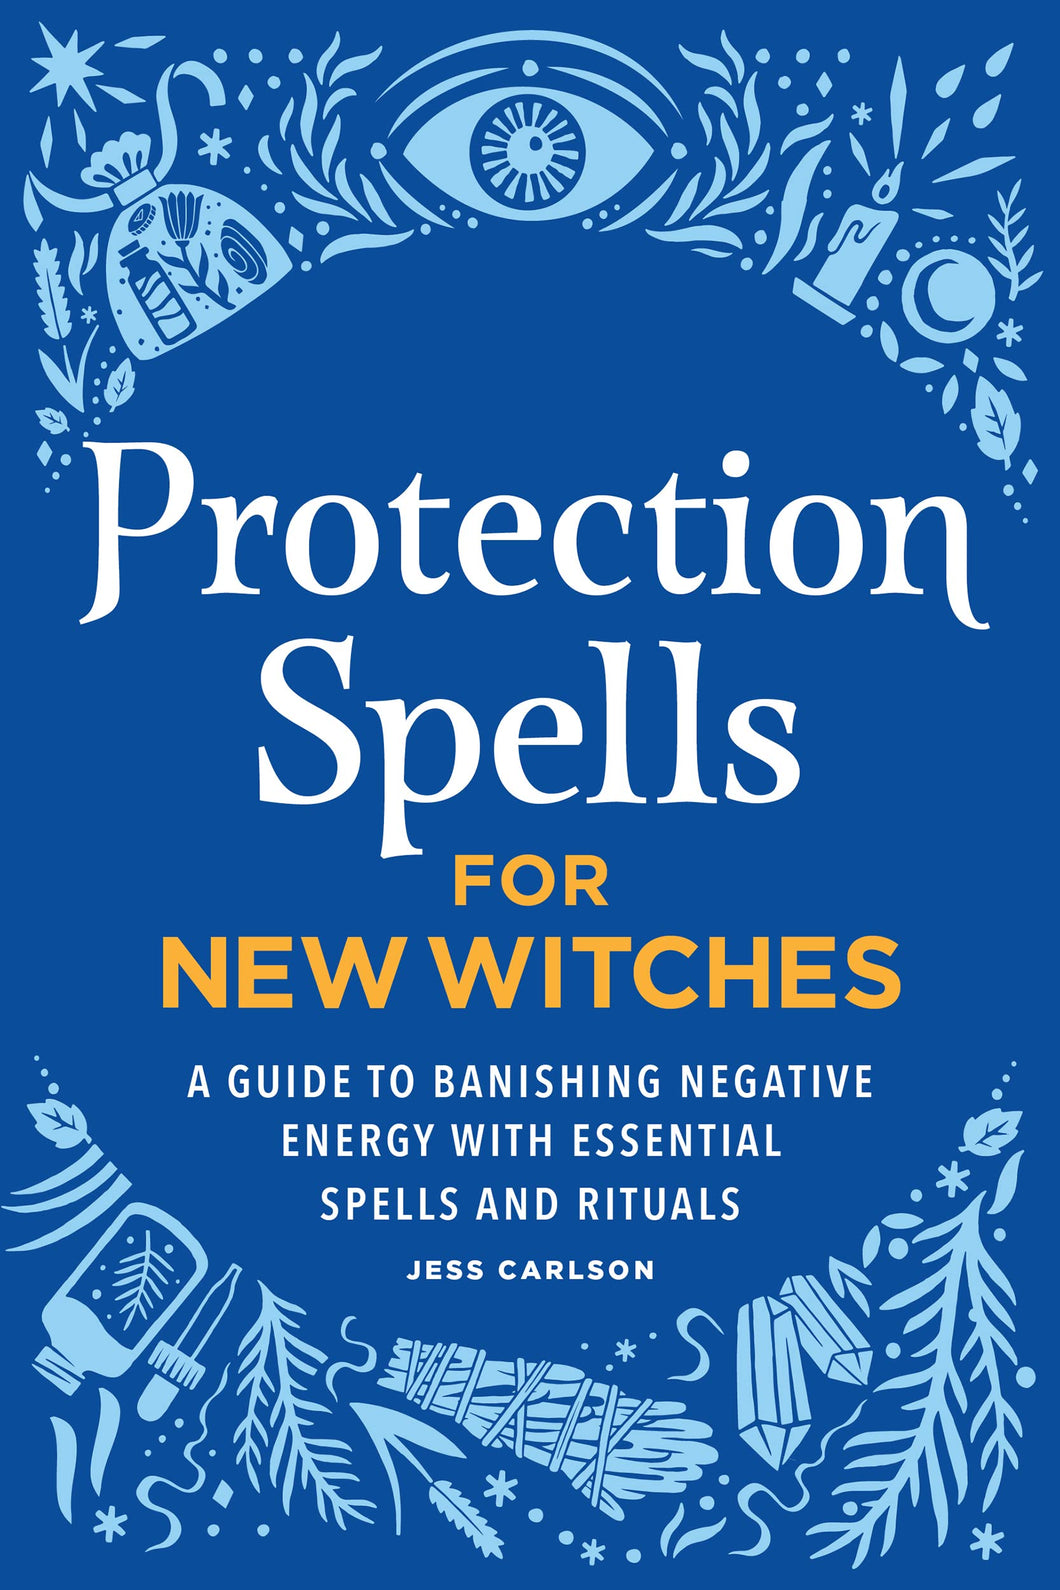 Protection Spells for New Witches by Jess Carlson